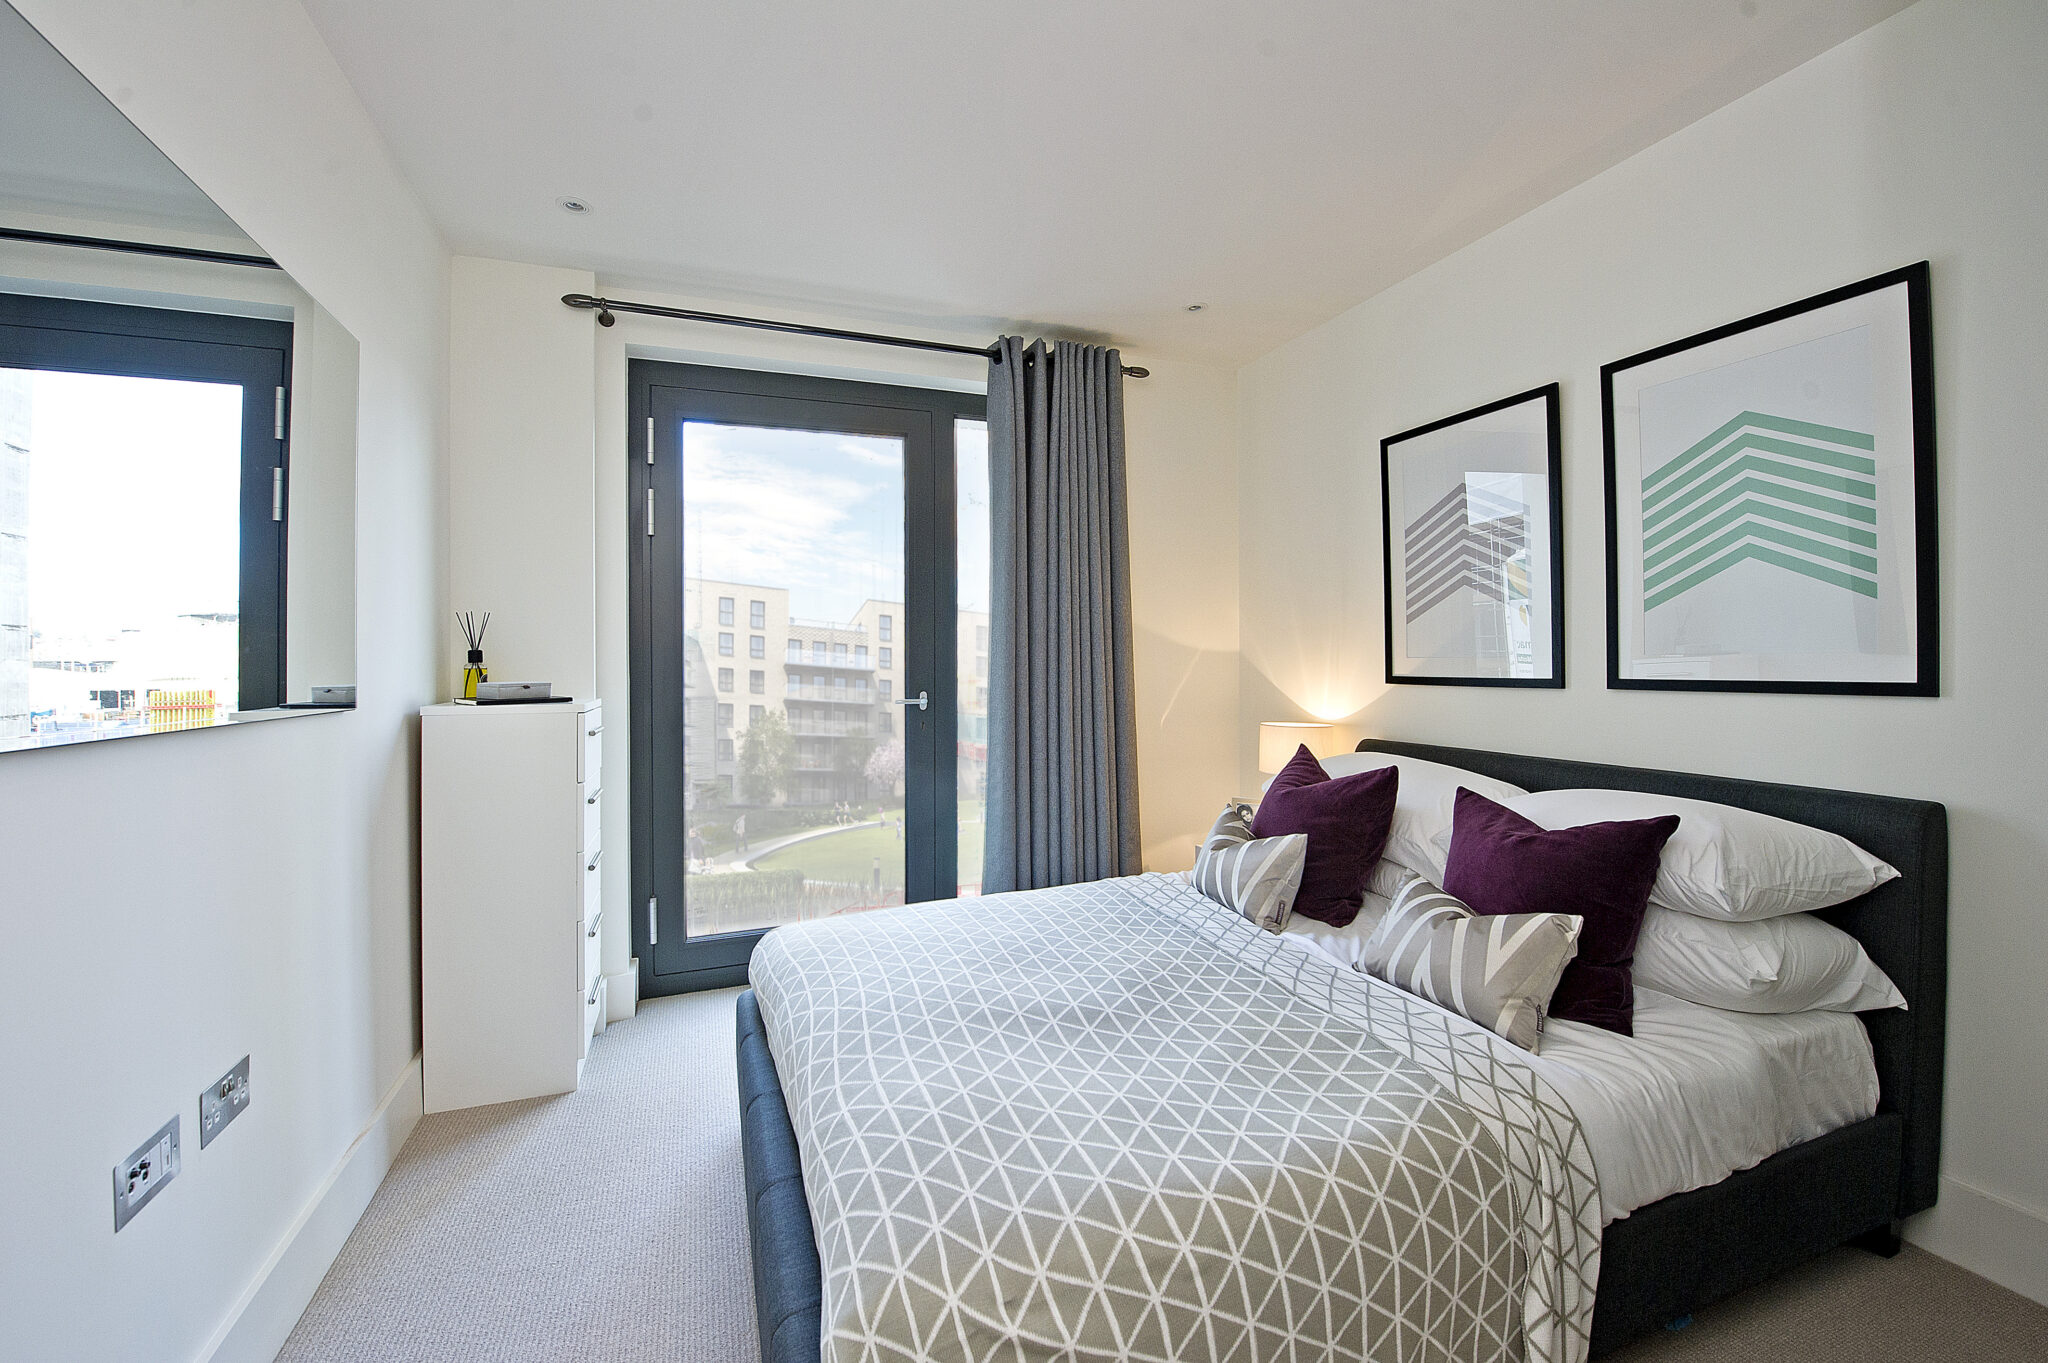 Olympic Way Apartments - West London Serviced Apartments - London | Urban Stay